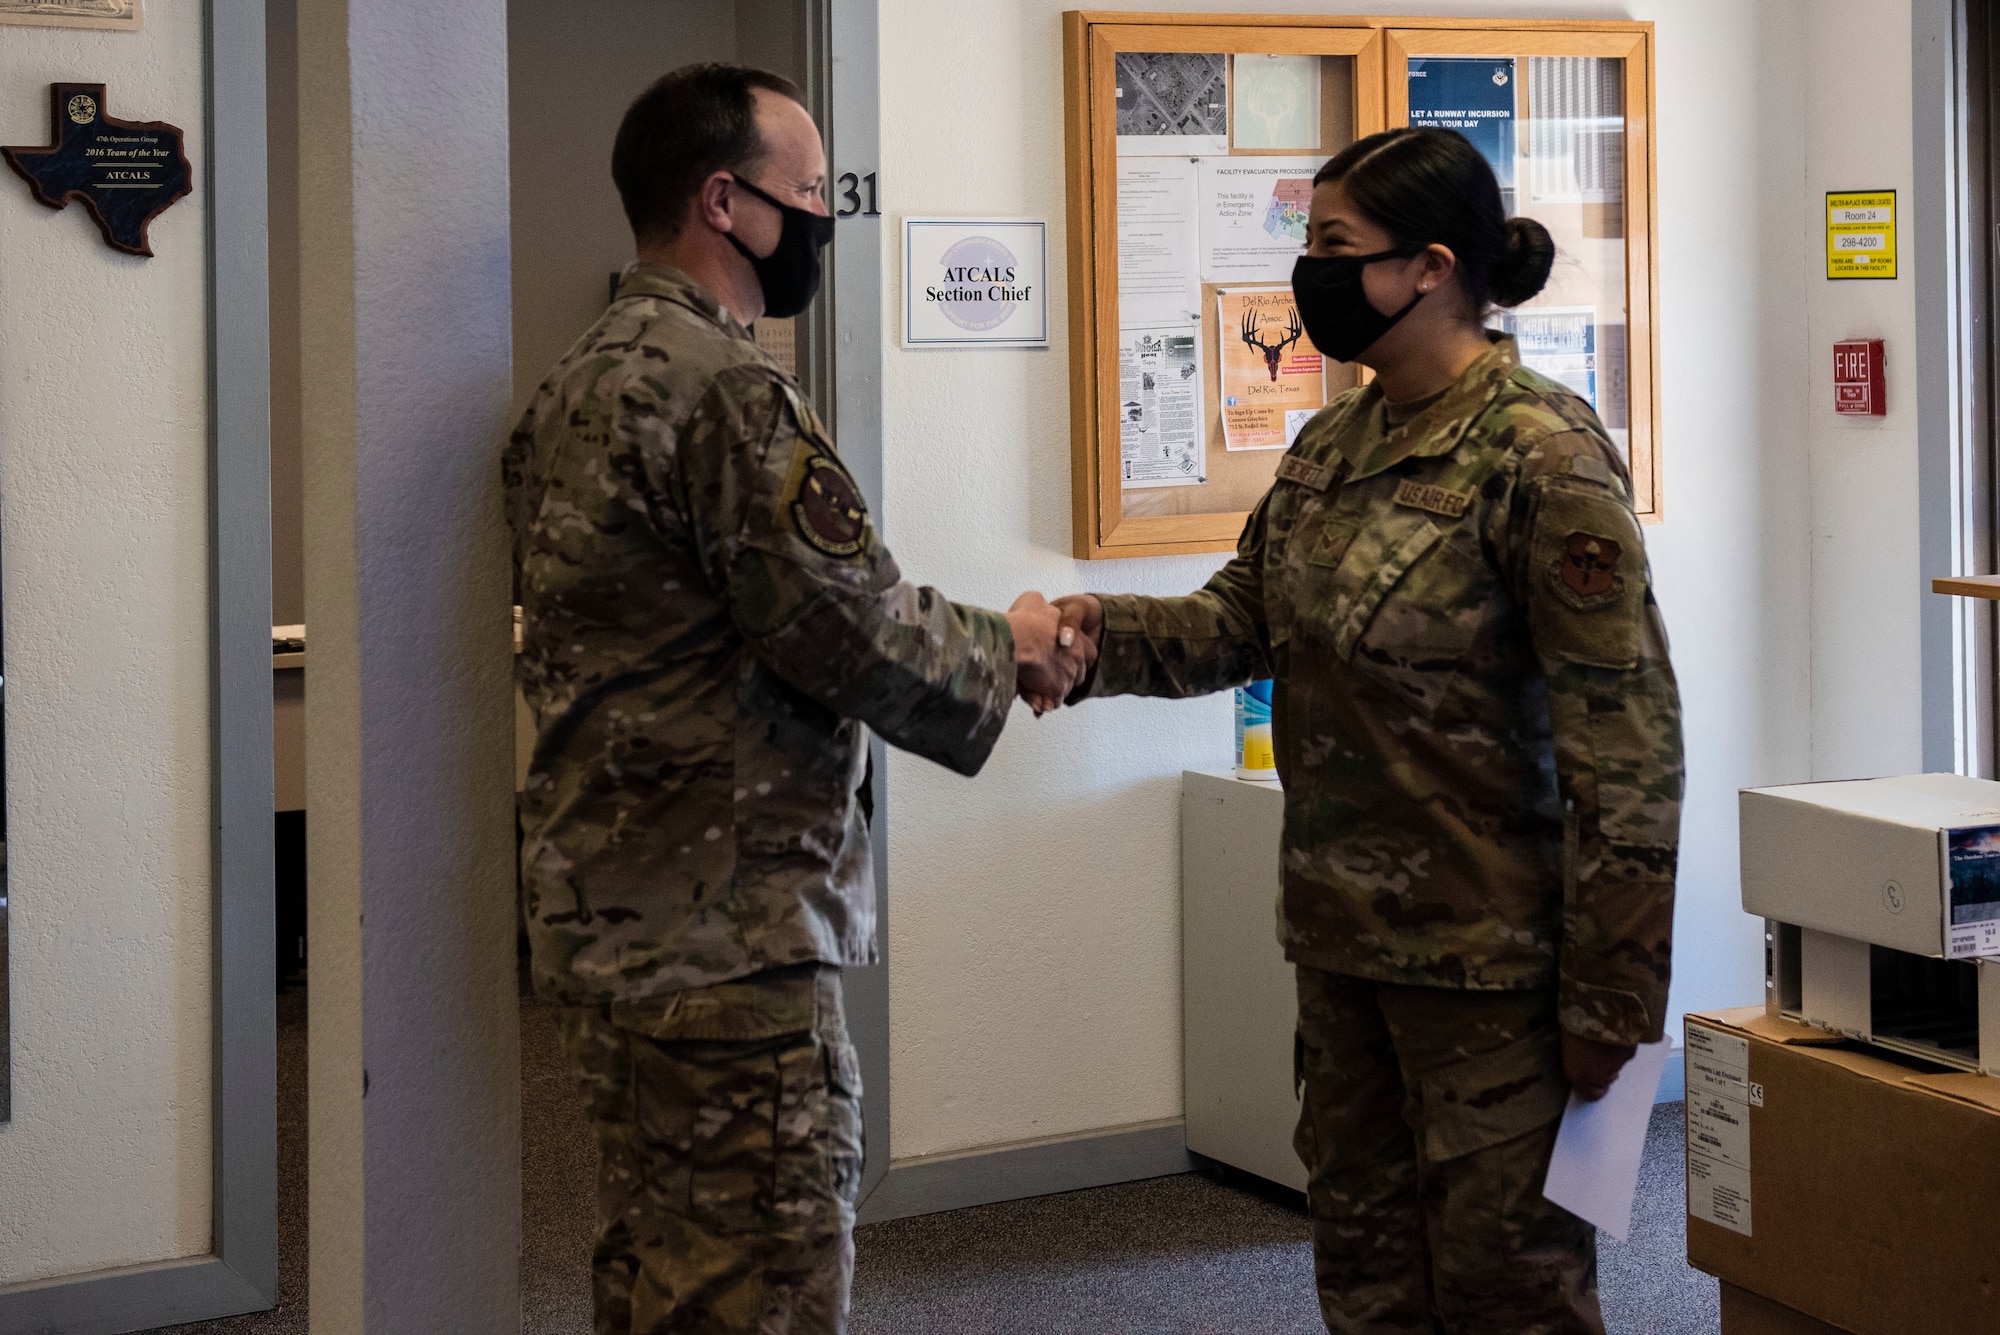 Col. Craig Prather, 47th Flying Training Wing commander, congratulates Senior Airman Jacqueline Beckett, 47th Operations Support Squadron radar airfield weather systems (RAWS) electronic technician, for achieving RAWS Airman of the year, Jan. 7, 2021, Laughlin Air Force Base Texas. Responsible for air traffic and warning radar systems, fixed and deployable navigational aids, weather equipment and radios, she ensures the equipment utilized by air traffic controllers and pilots remains in perfect working order.  (U.S. Air Force photo by Airman 1st Class David Phaff)